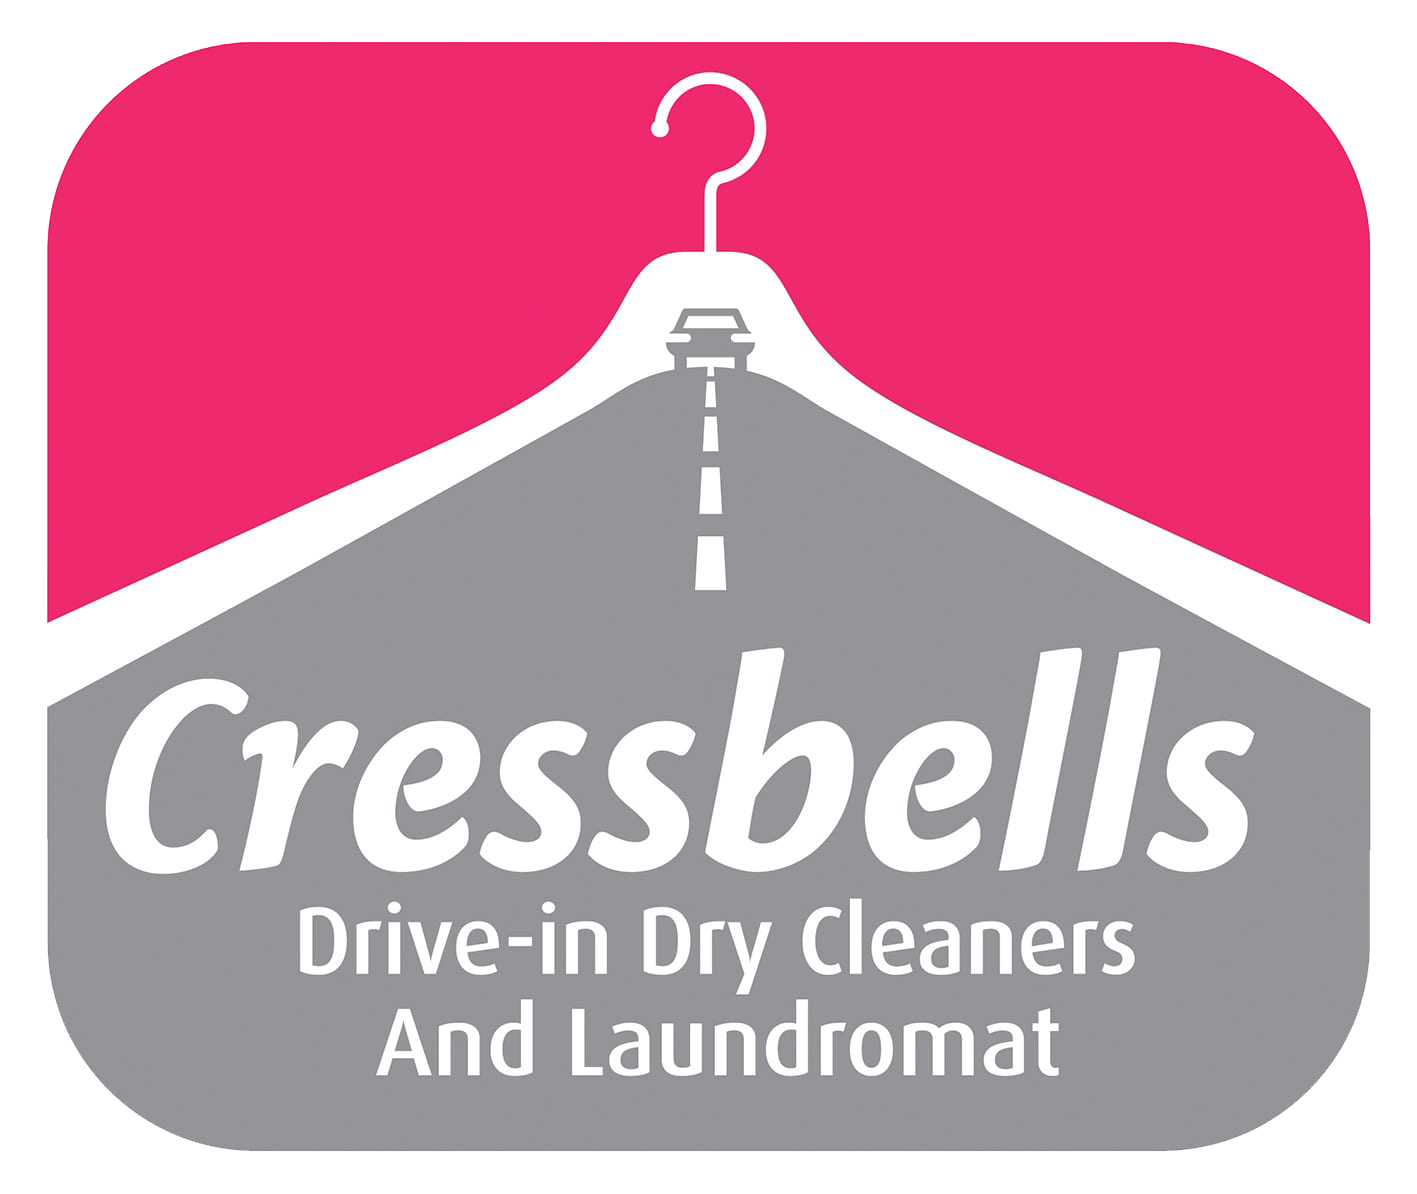 Cressbell's Dry Cleaners